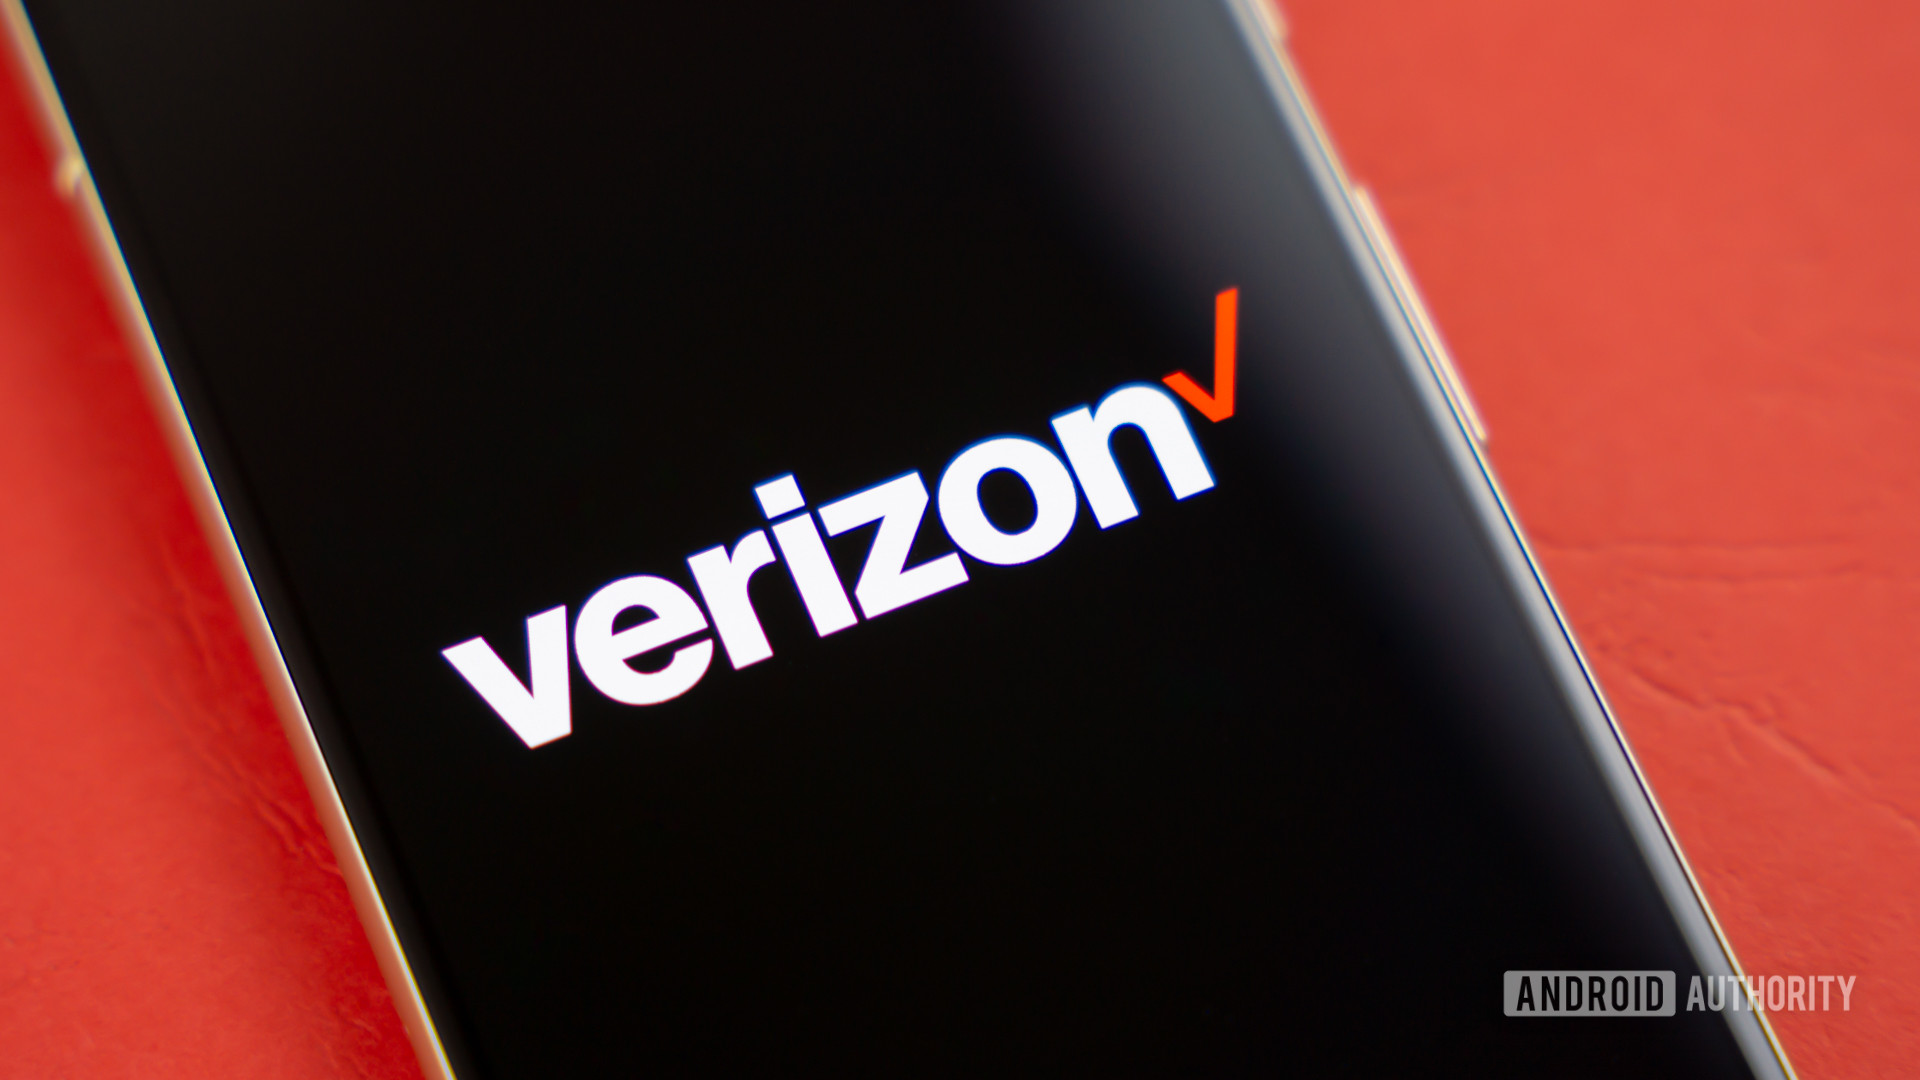 Verizon logo on smartphone with a colored background Stock photo 2